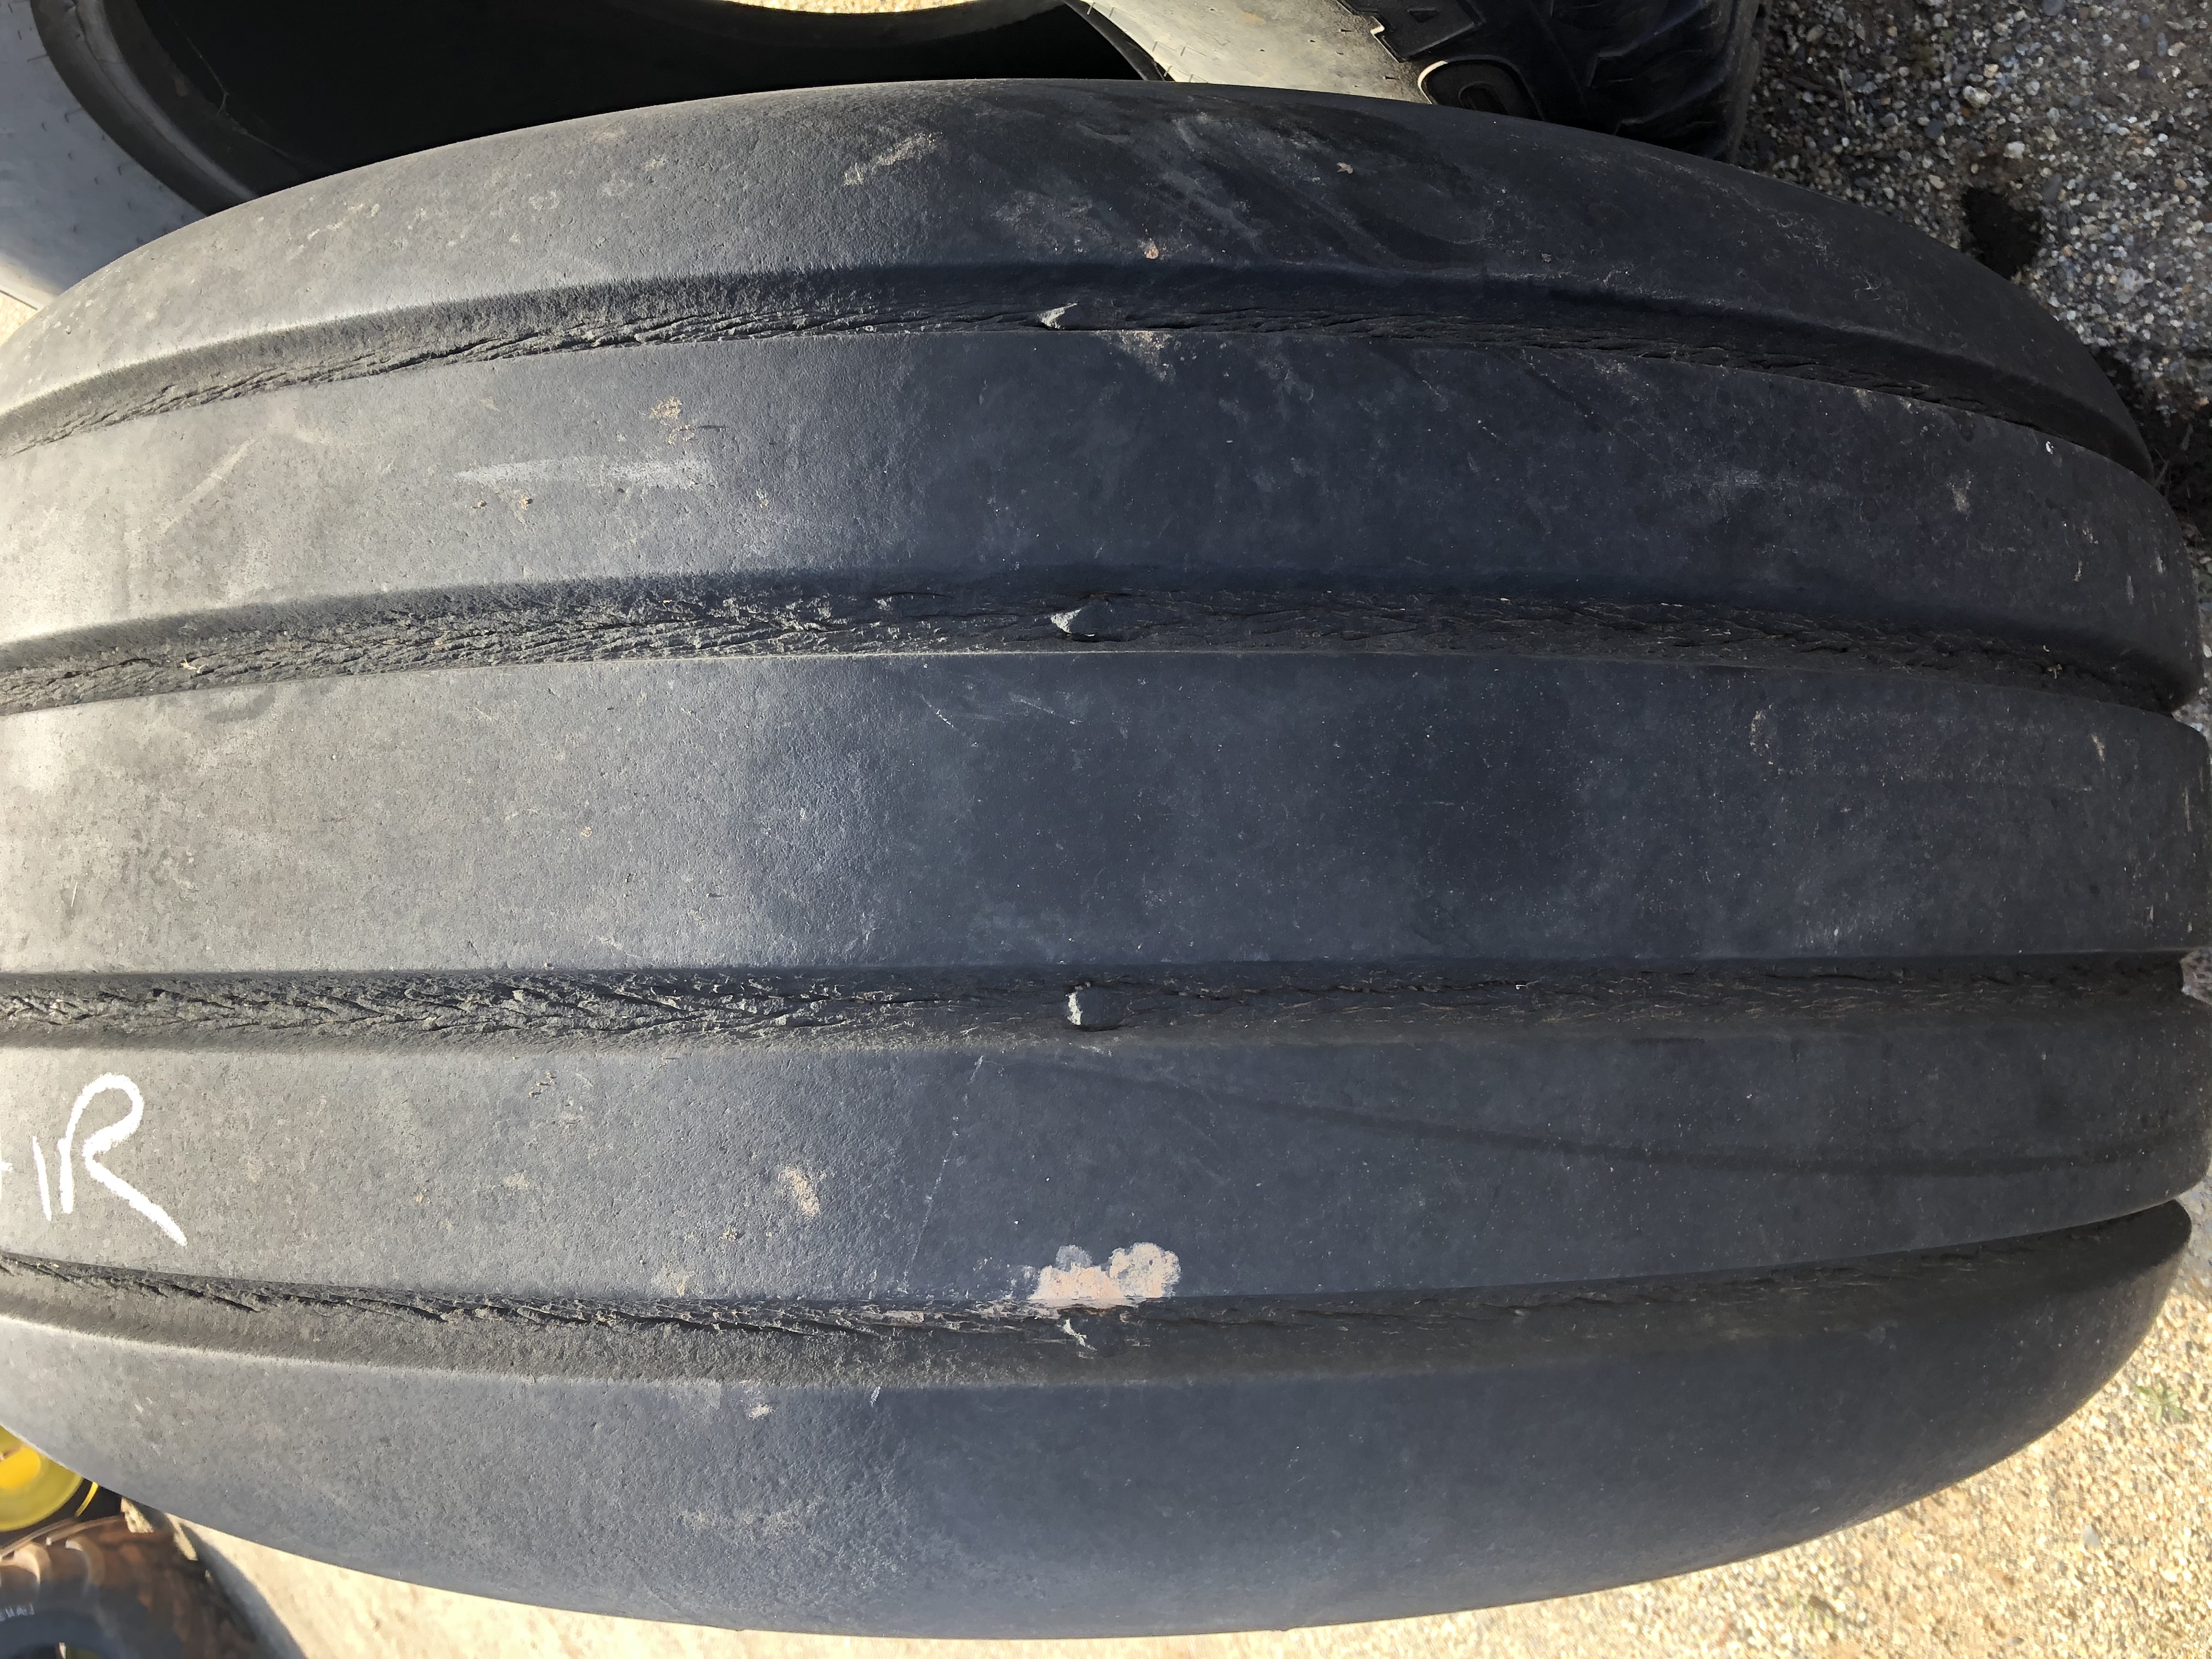 21.5L16.1 Goodyear, stubble damaged but holds air